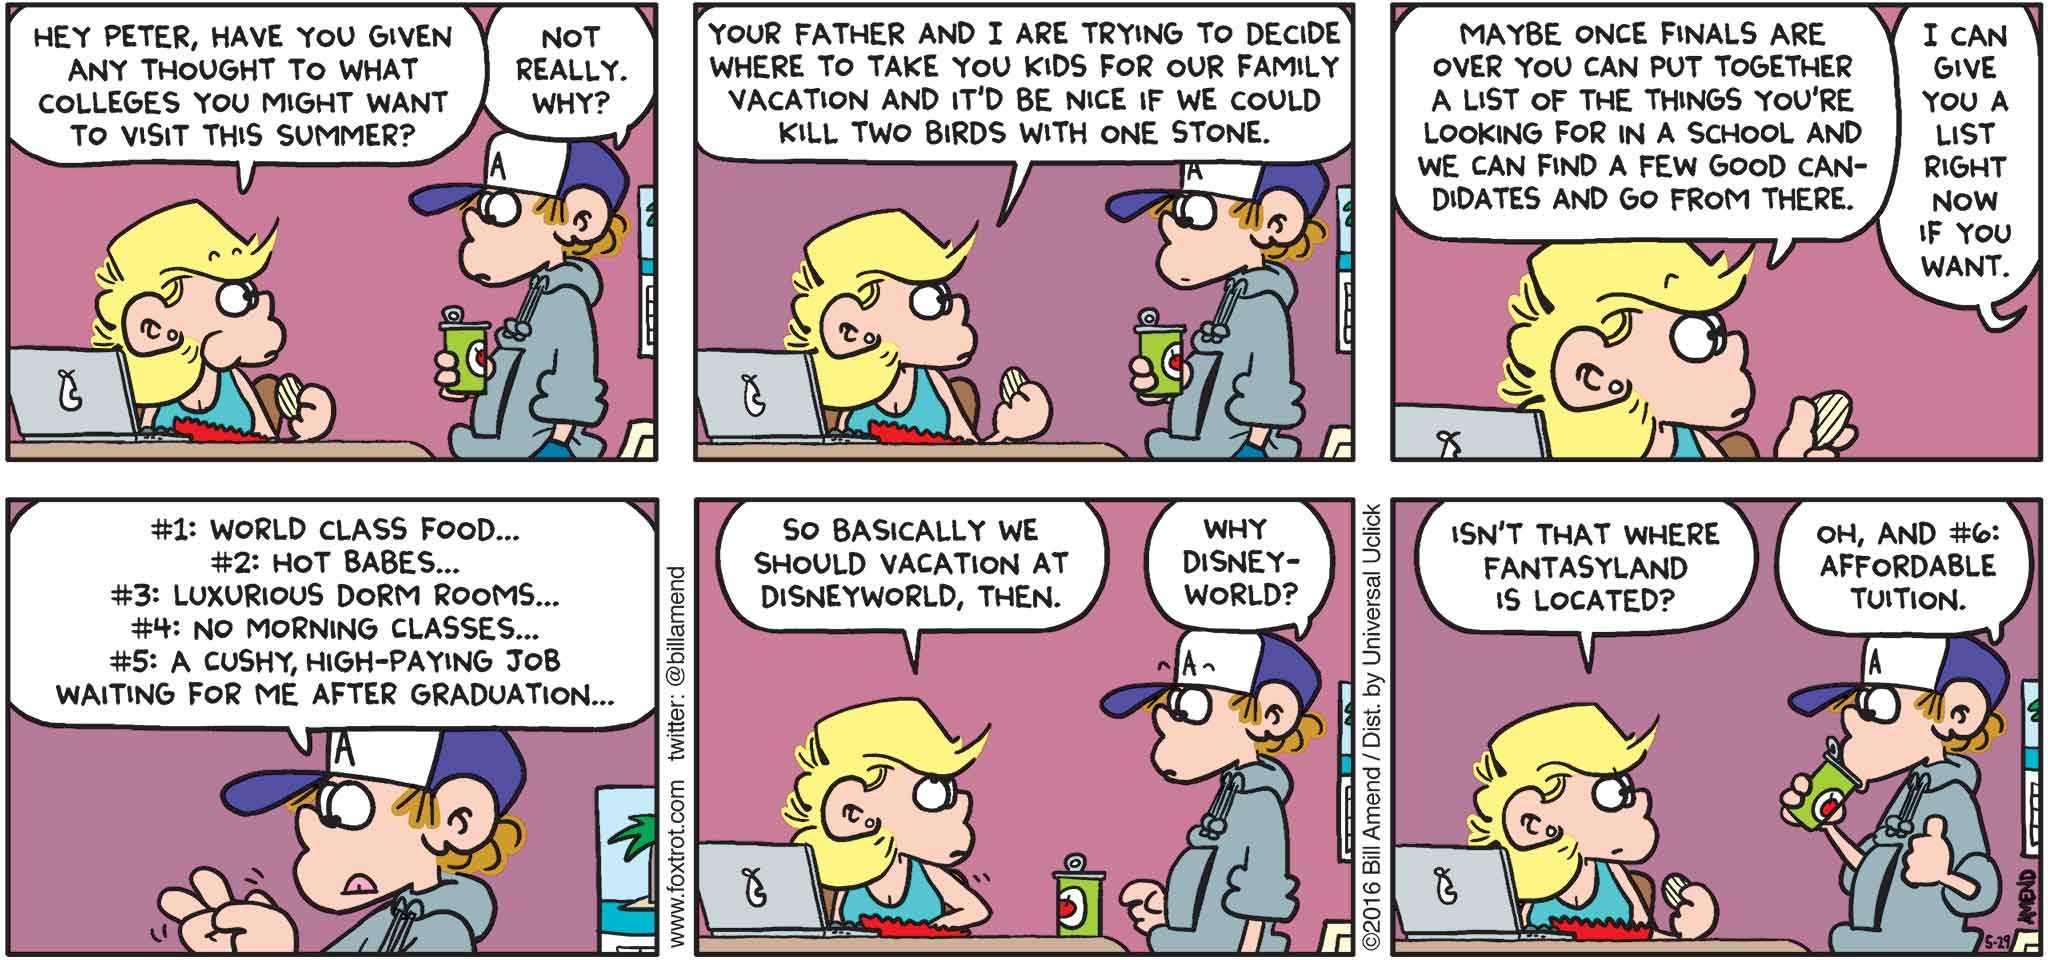 FoxTrot by Bill Amend - "College Dreams" published May 29, 2016 - Andy: Hey Peter, have you given any thought to what colleges you might want to visit this summer? Peter: Not really. Why? Andy: Your father and I are trying to decide where to take you kids for our family vacation and it'd be nice if we could kill two birds with one stone. Maybe once finals are over you can put together a list of things you're looking for in a school and we can find a few good candidates and go from there. Peter: I can give you a list right now if you want. #1: World class food... #2: Hot babes... #3: Luxurious dorm rooms... #4: No morning classes... #5 A cush, high-paying job waiting for me after graduation... Andy: So basically we should vacation at Disney World, then. Peter: Why Disney World? Andy: Isn't that where Fantasyland is located? Peter: Oh, and #6: Affordable tuition.